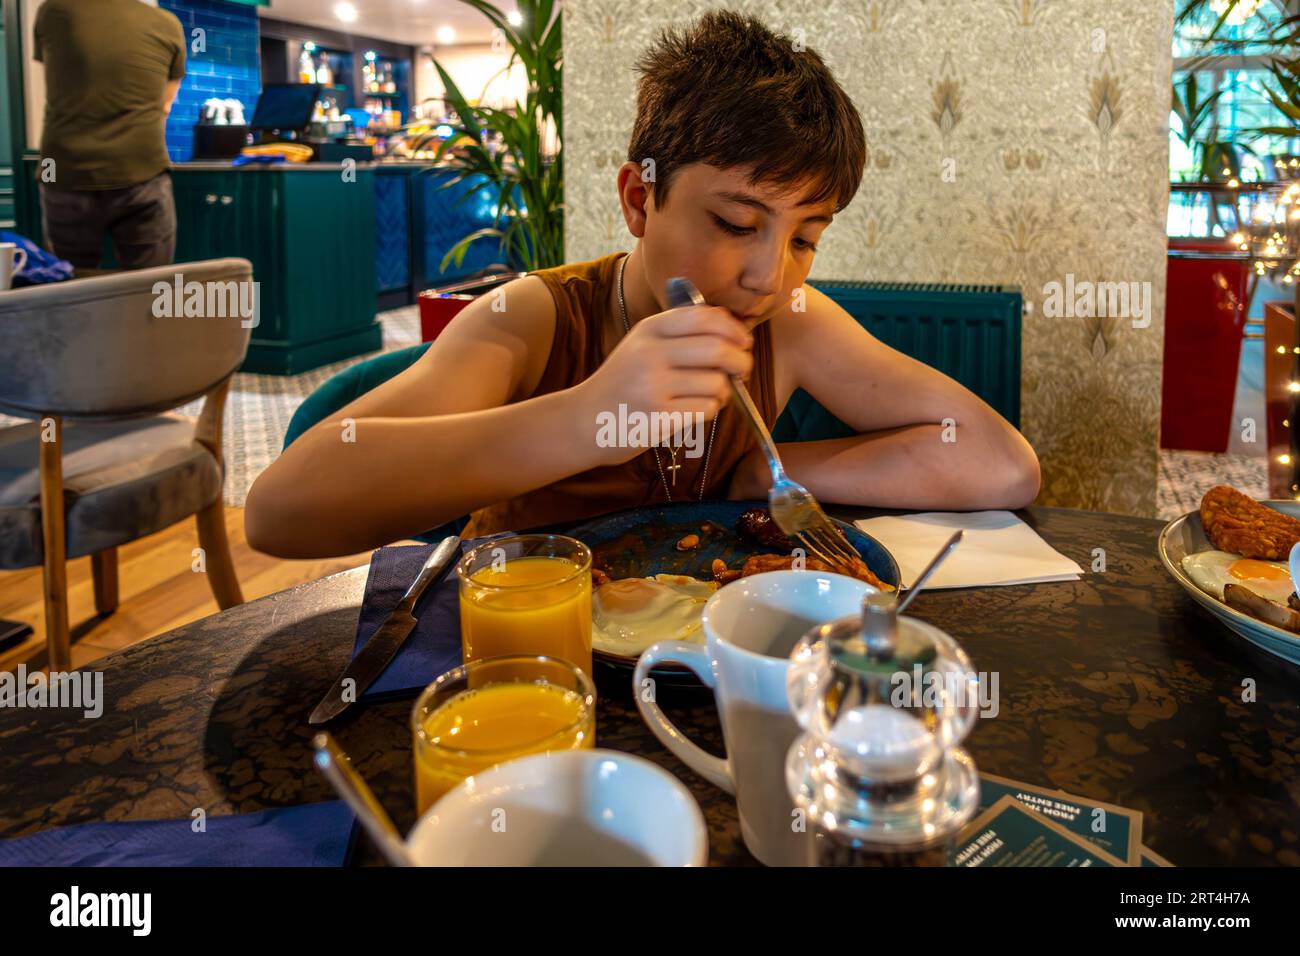 A boy eating a help yourself buffer breakfast at a hotel with a full English items selected including fried egg, beans and a glass of orange juice Stock Photo